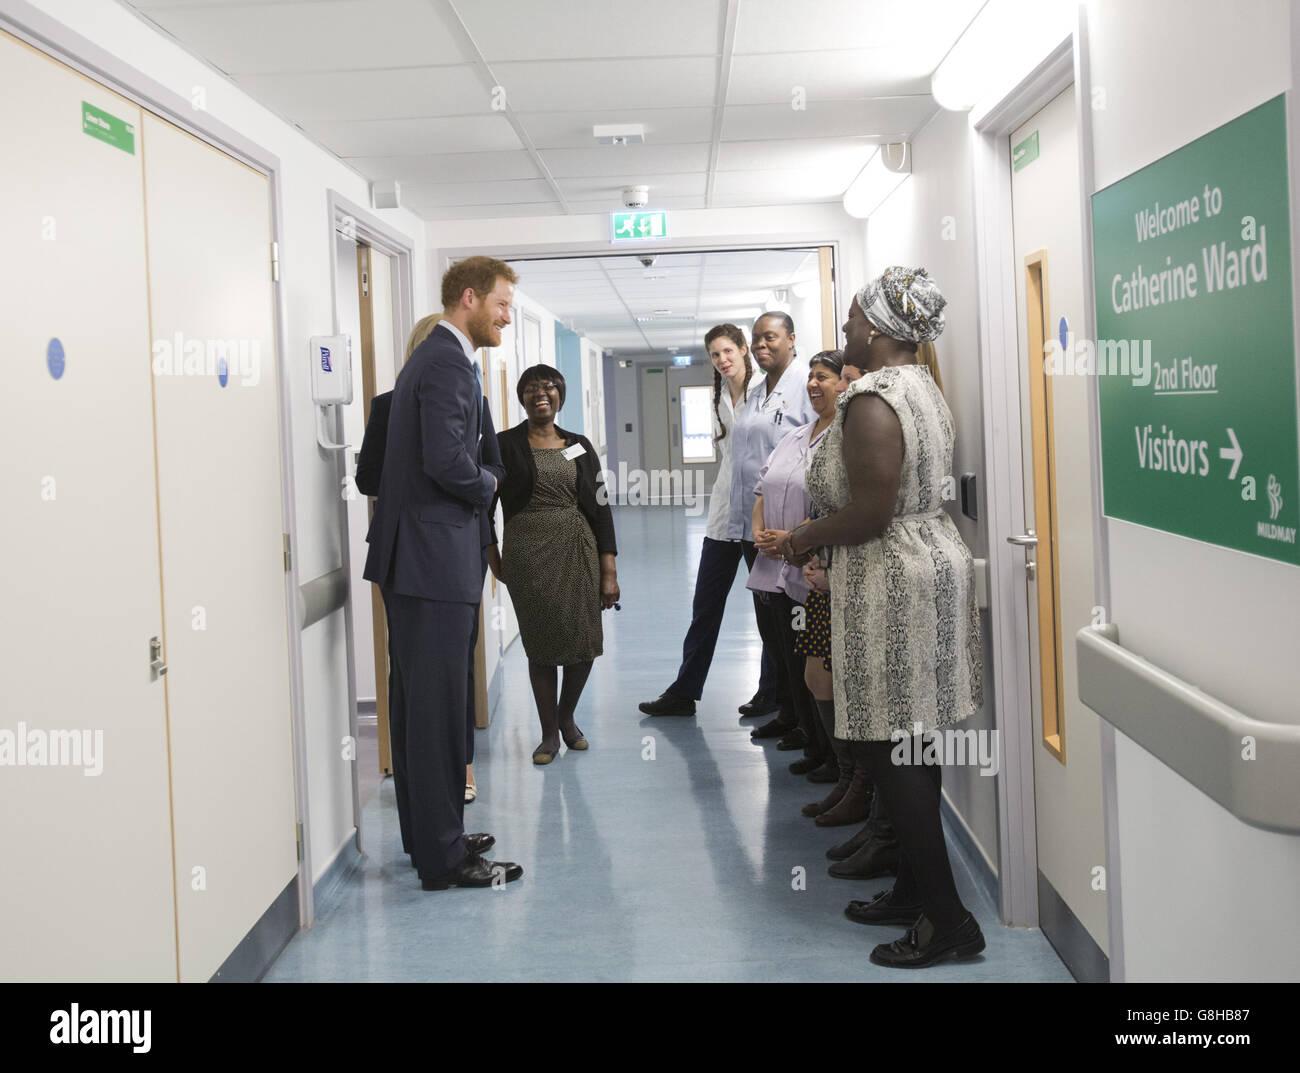 Prince Harry meets nursing staff during his visit to Mildmay HIV hospital and charity in London, to mark the official opening of their new purpose-built facilities. Stock Photo